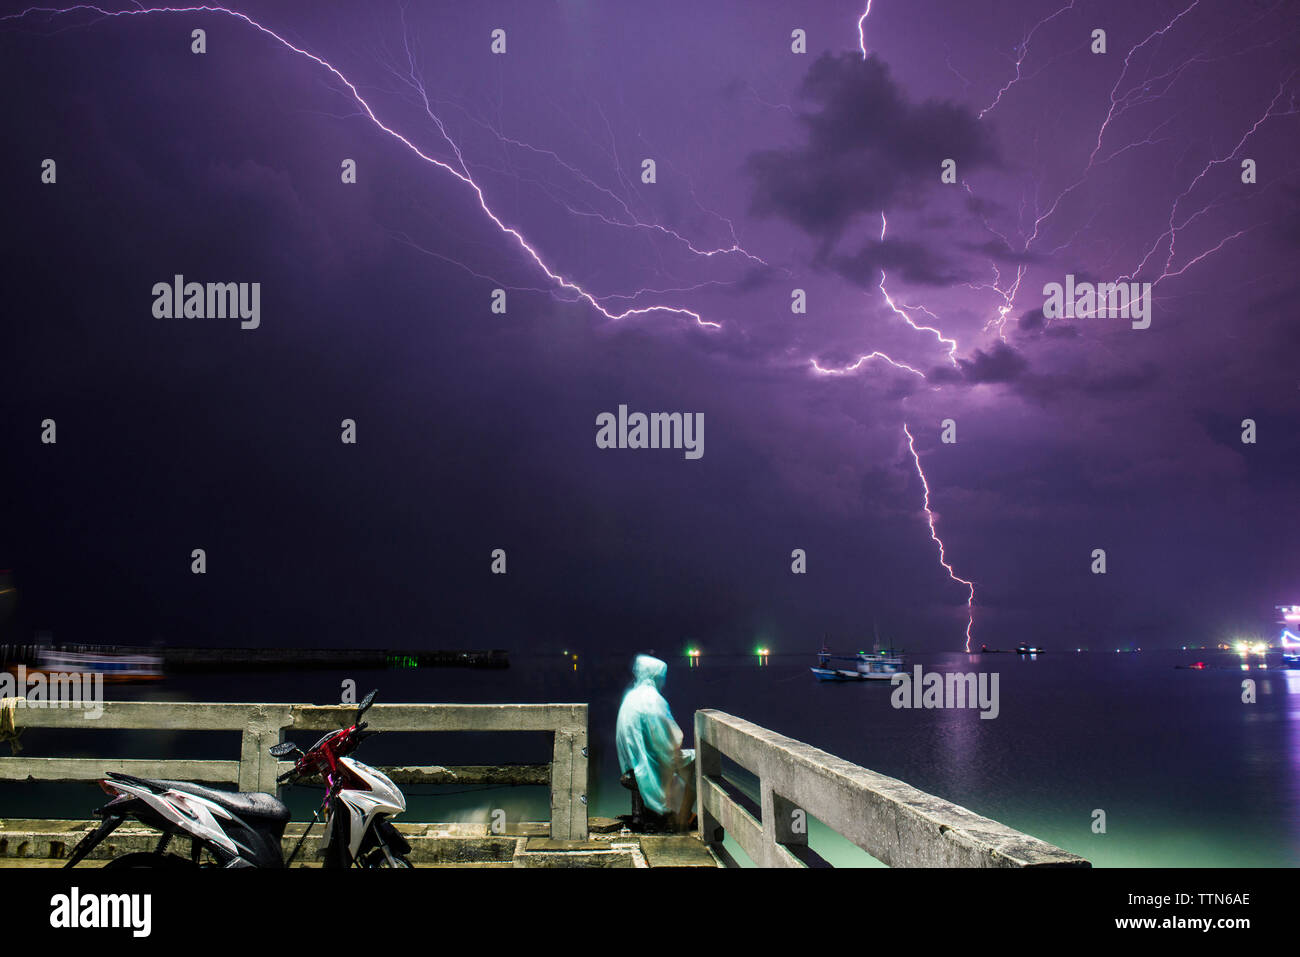 Man sitting at pier by sea against lightning in purple sky Stock Photo